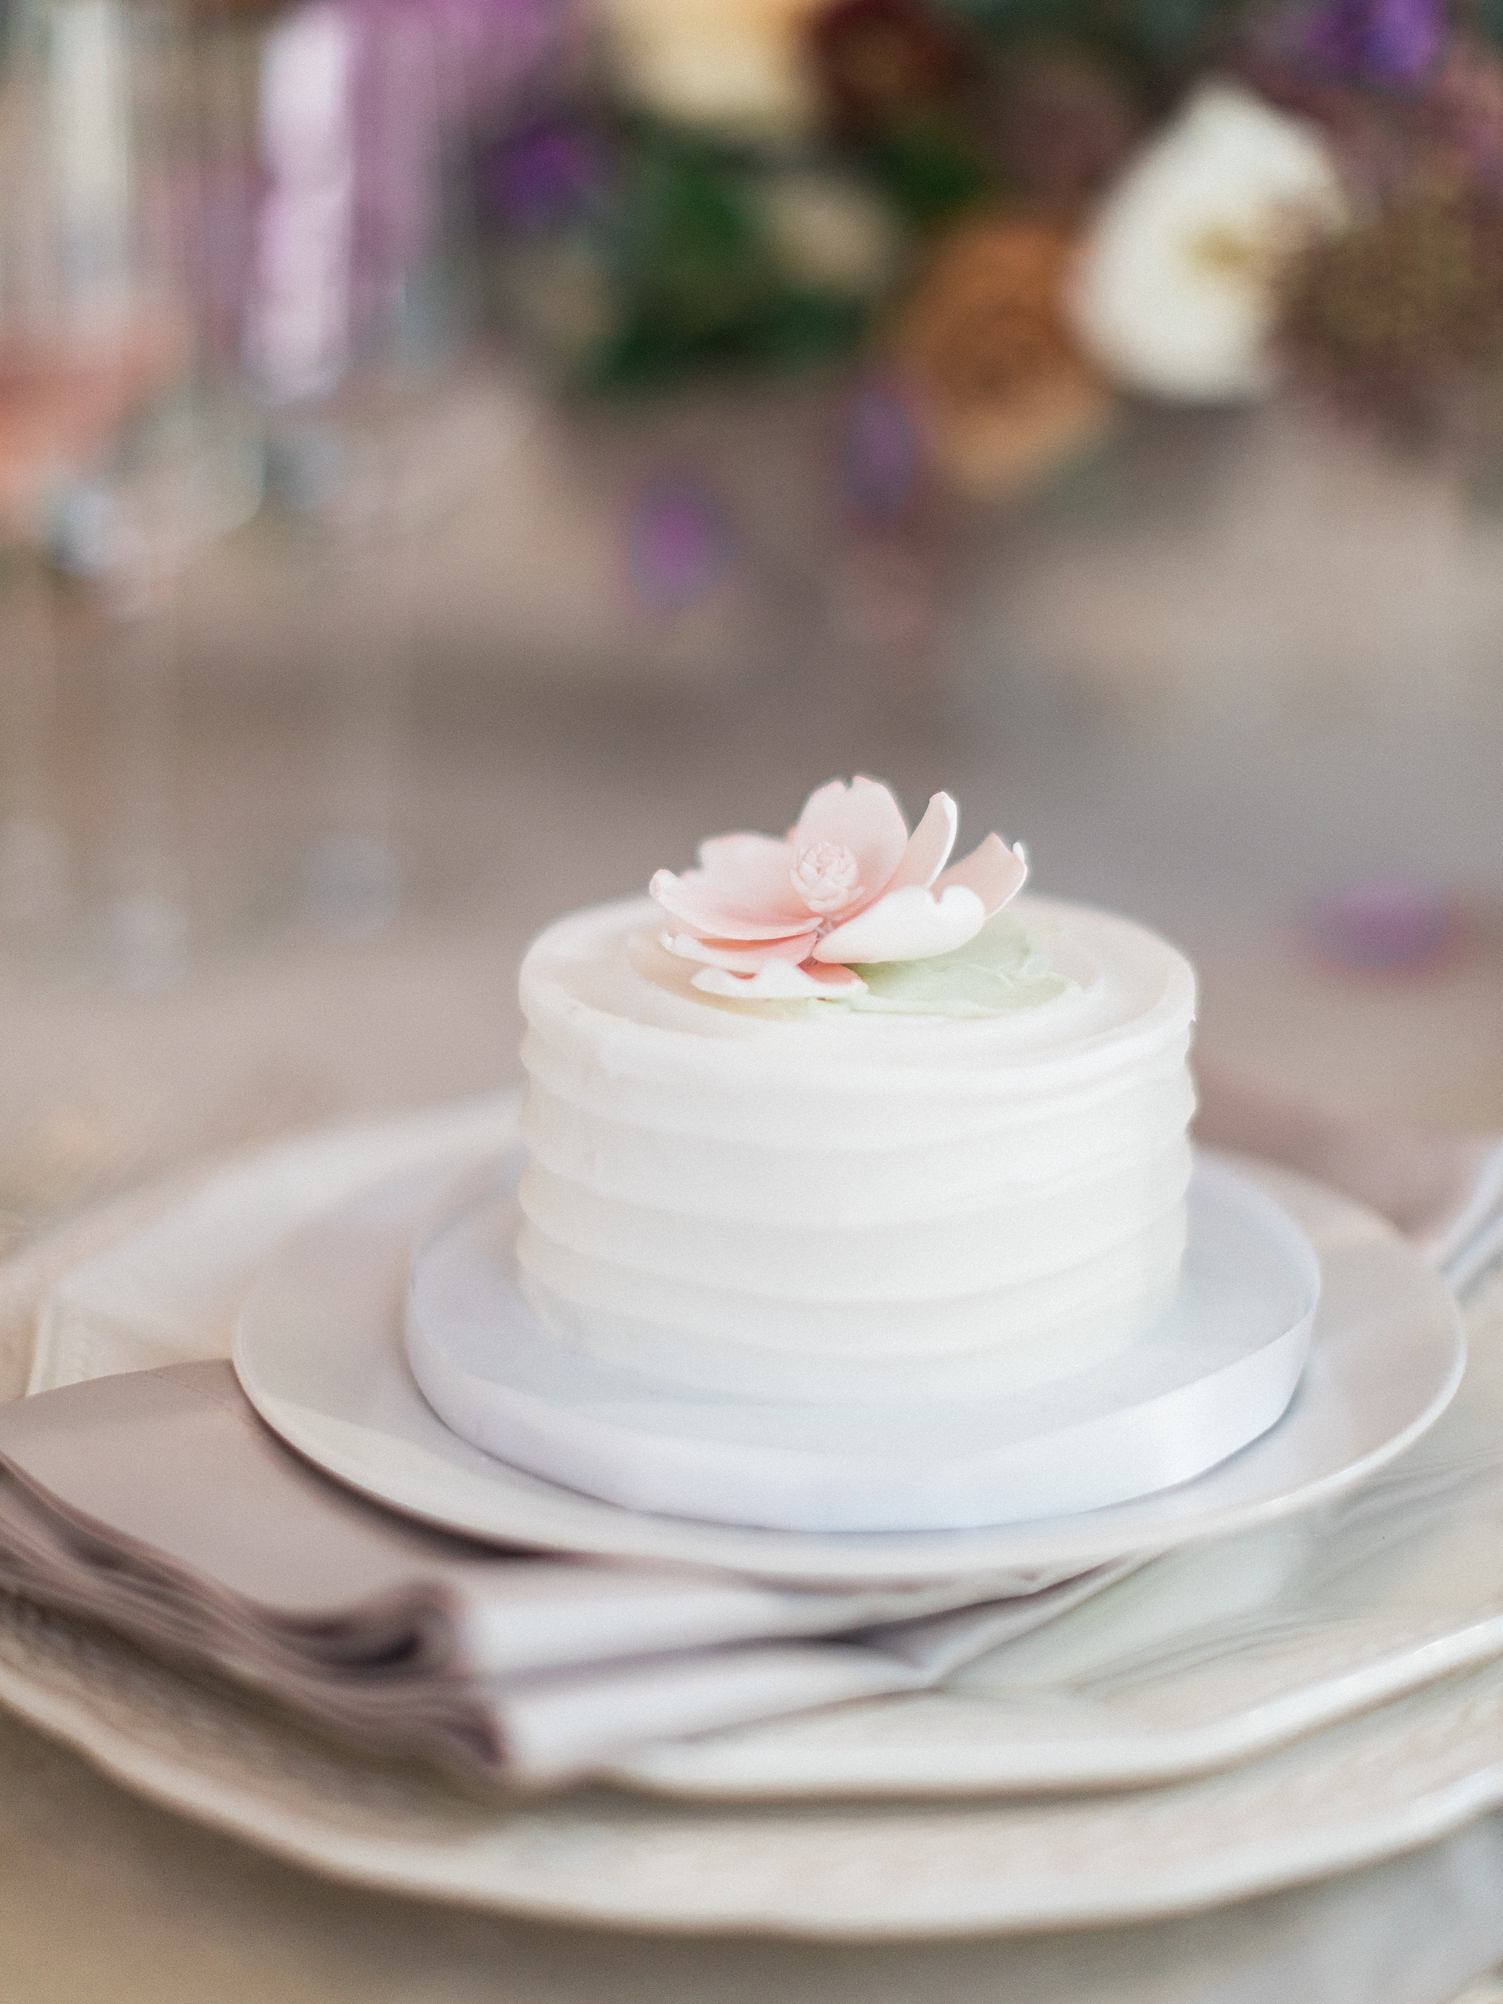 wedding reception small cake dessert with pink flower on top